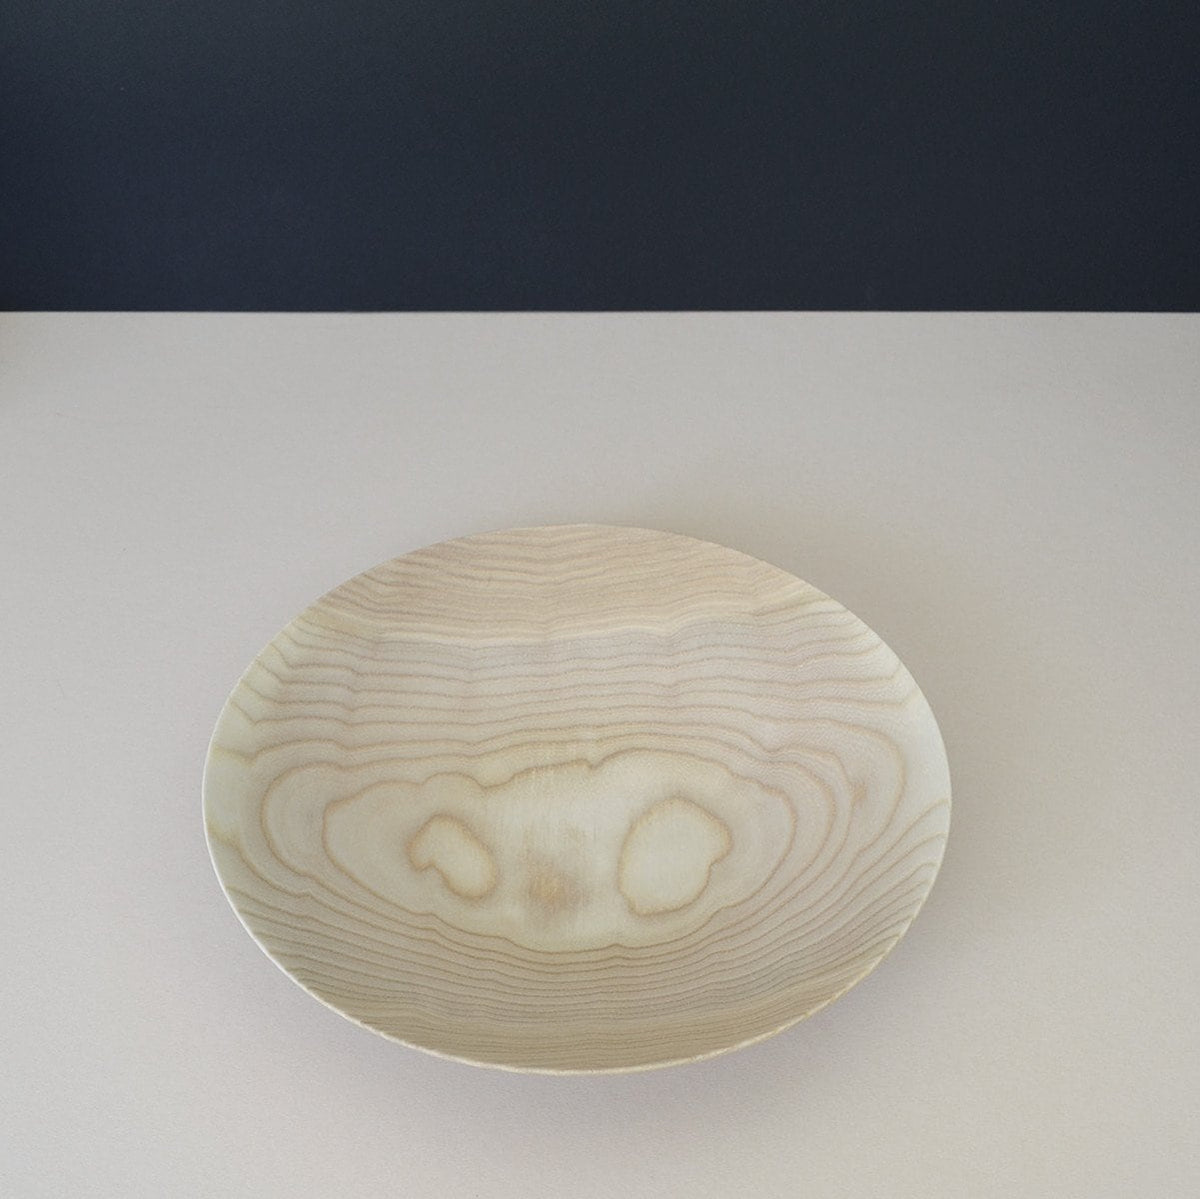 A white plate with a wood grain on it would be the Wooden Plate - Medium made by Kihachi.